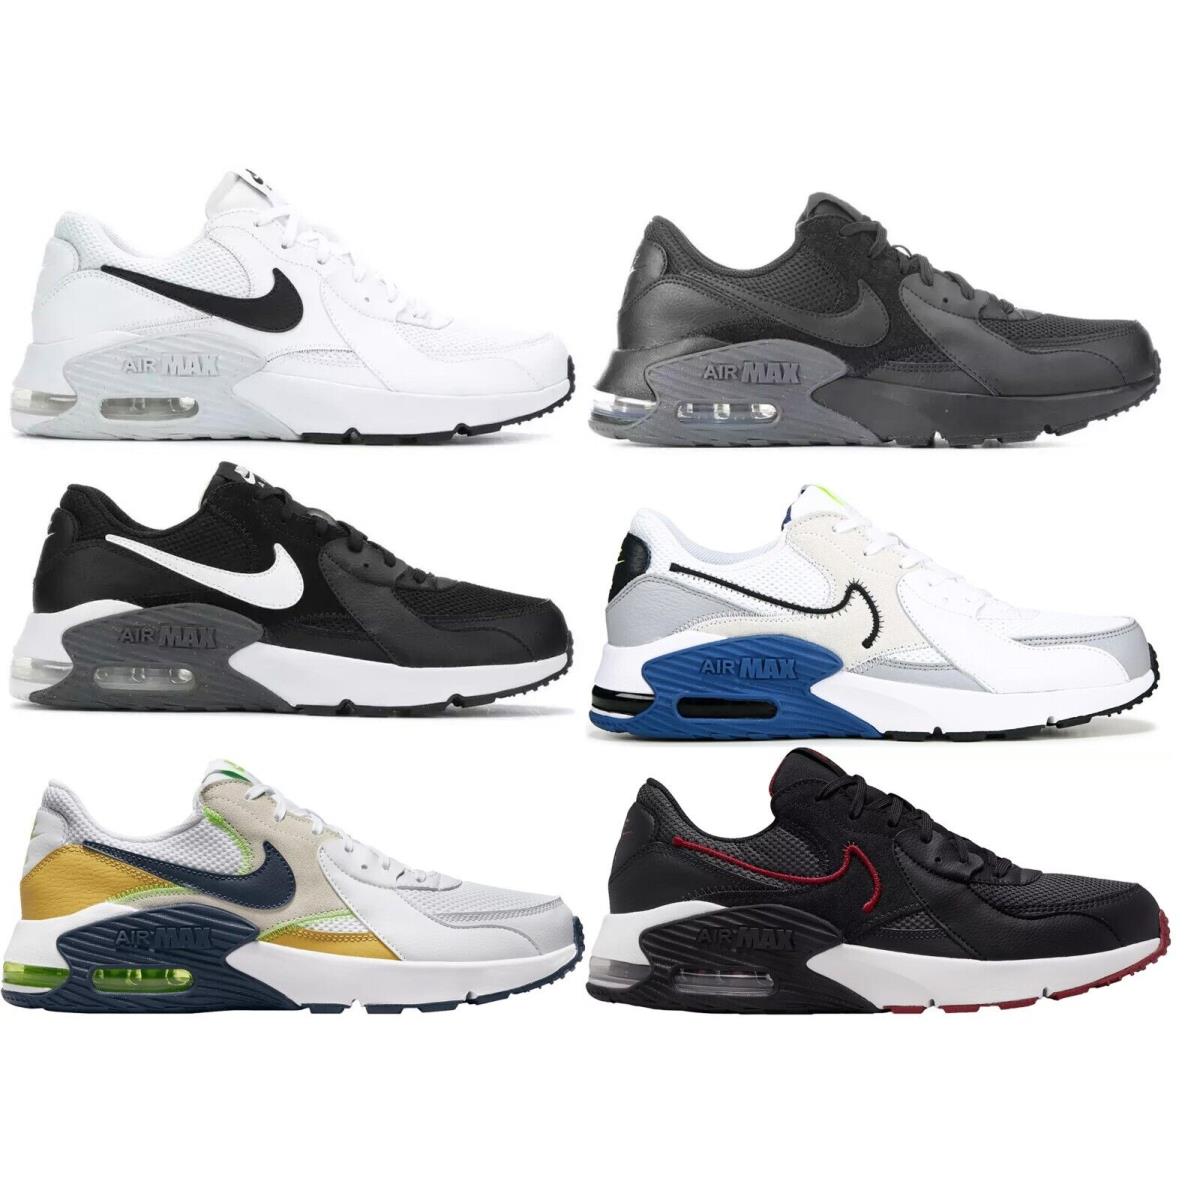 Nike Air Max Excee Men`s Casual Shoes All Colors US Sizes 7-14 - ALL COLORS